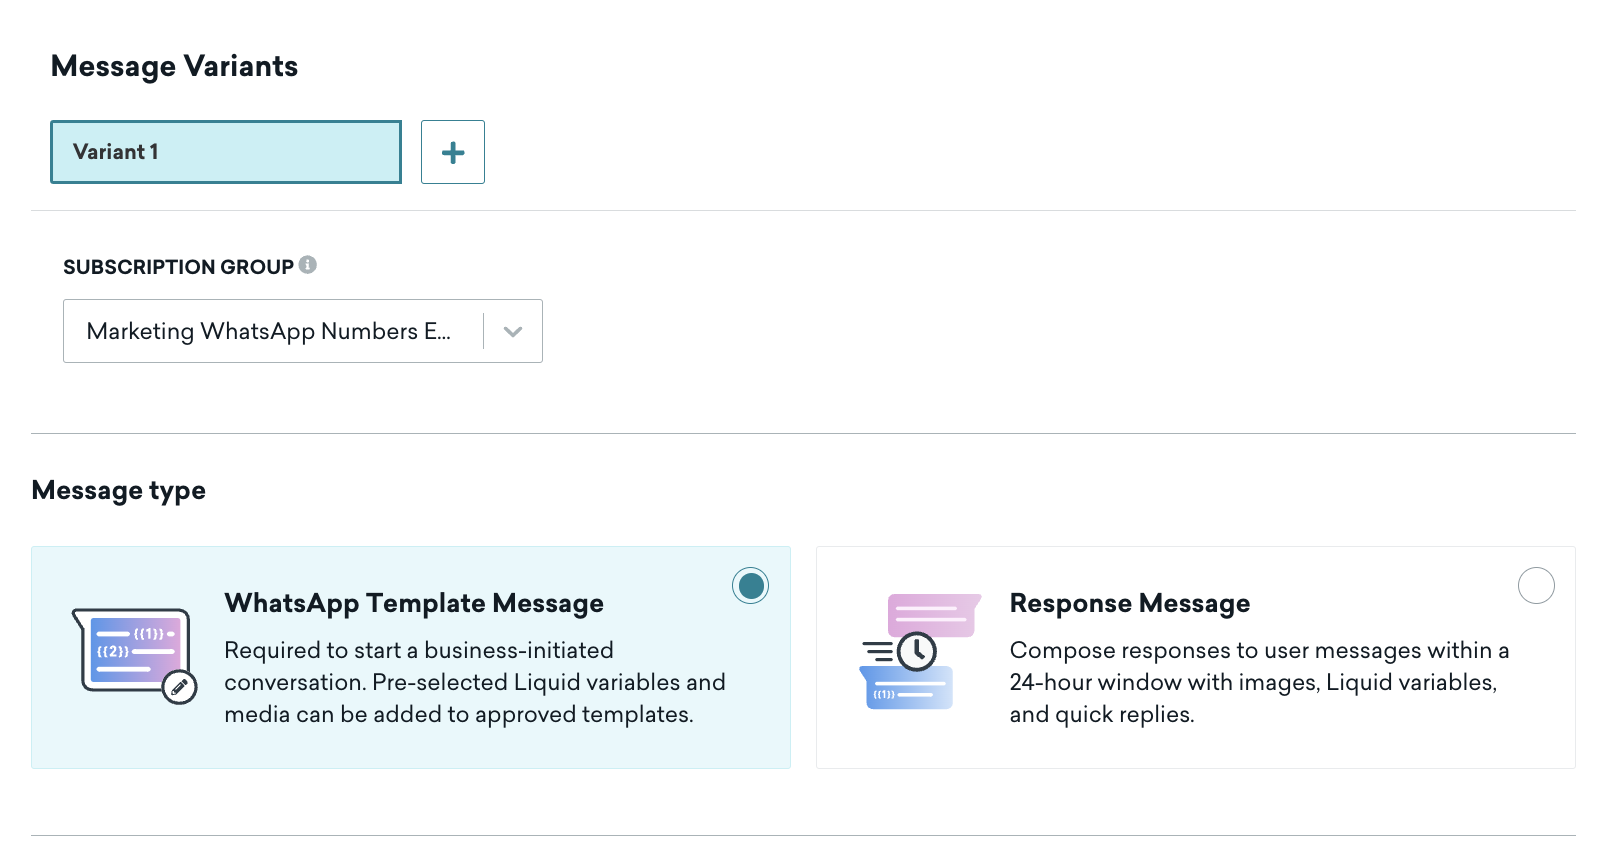 The Message Variants section lets you select a subscription group and one of two message types: WhatsApp Template Message and Response Message.